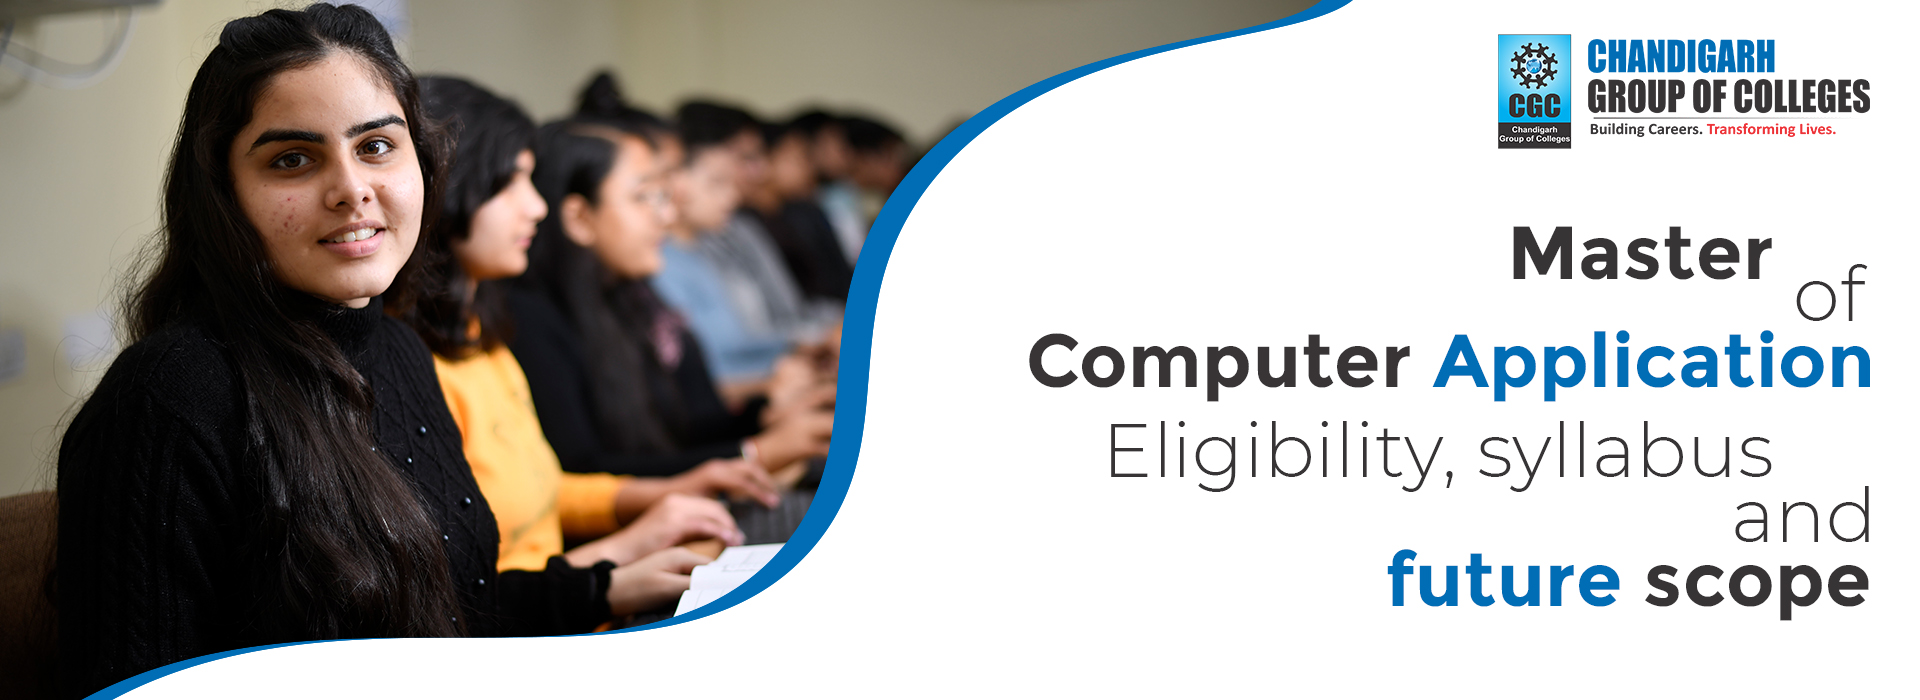 Master of Computer Application: Eligibility, Syllabus, And Future Scope 